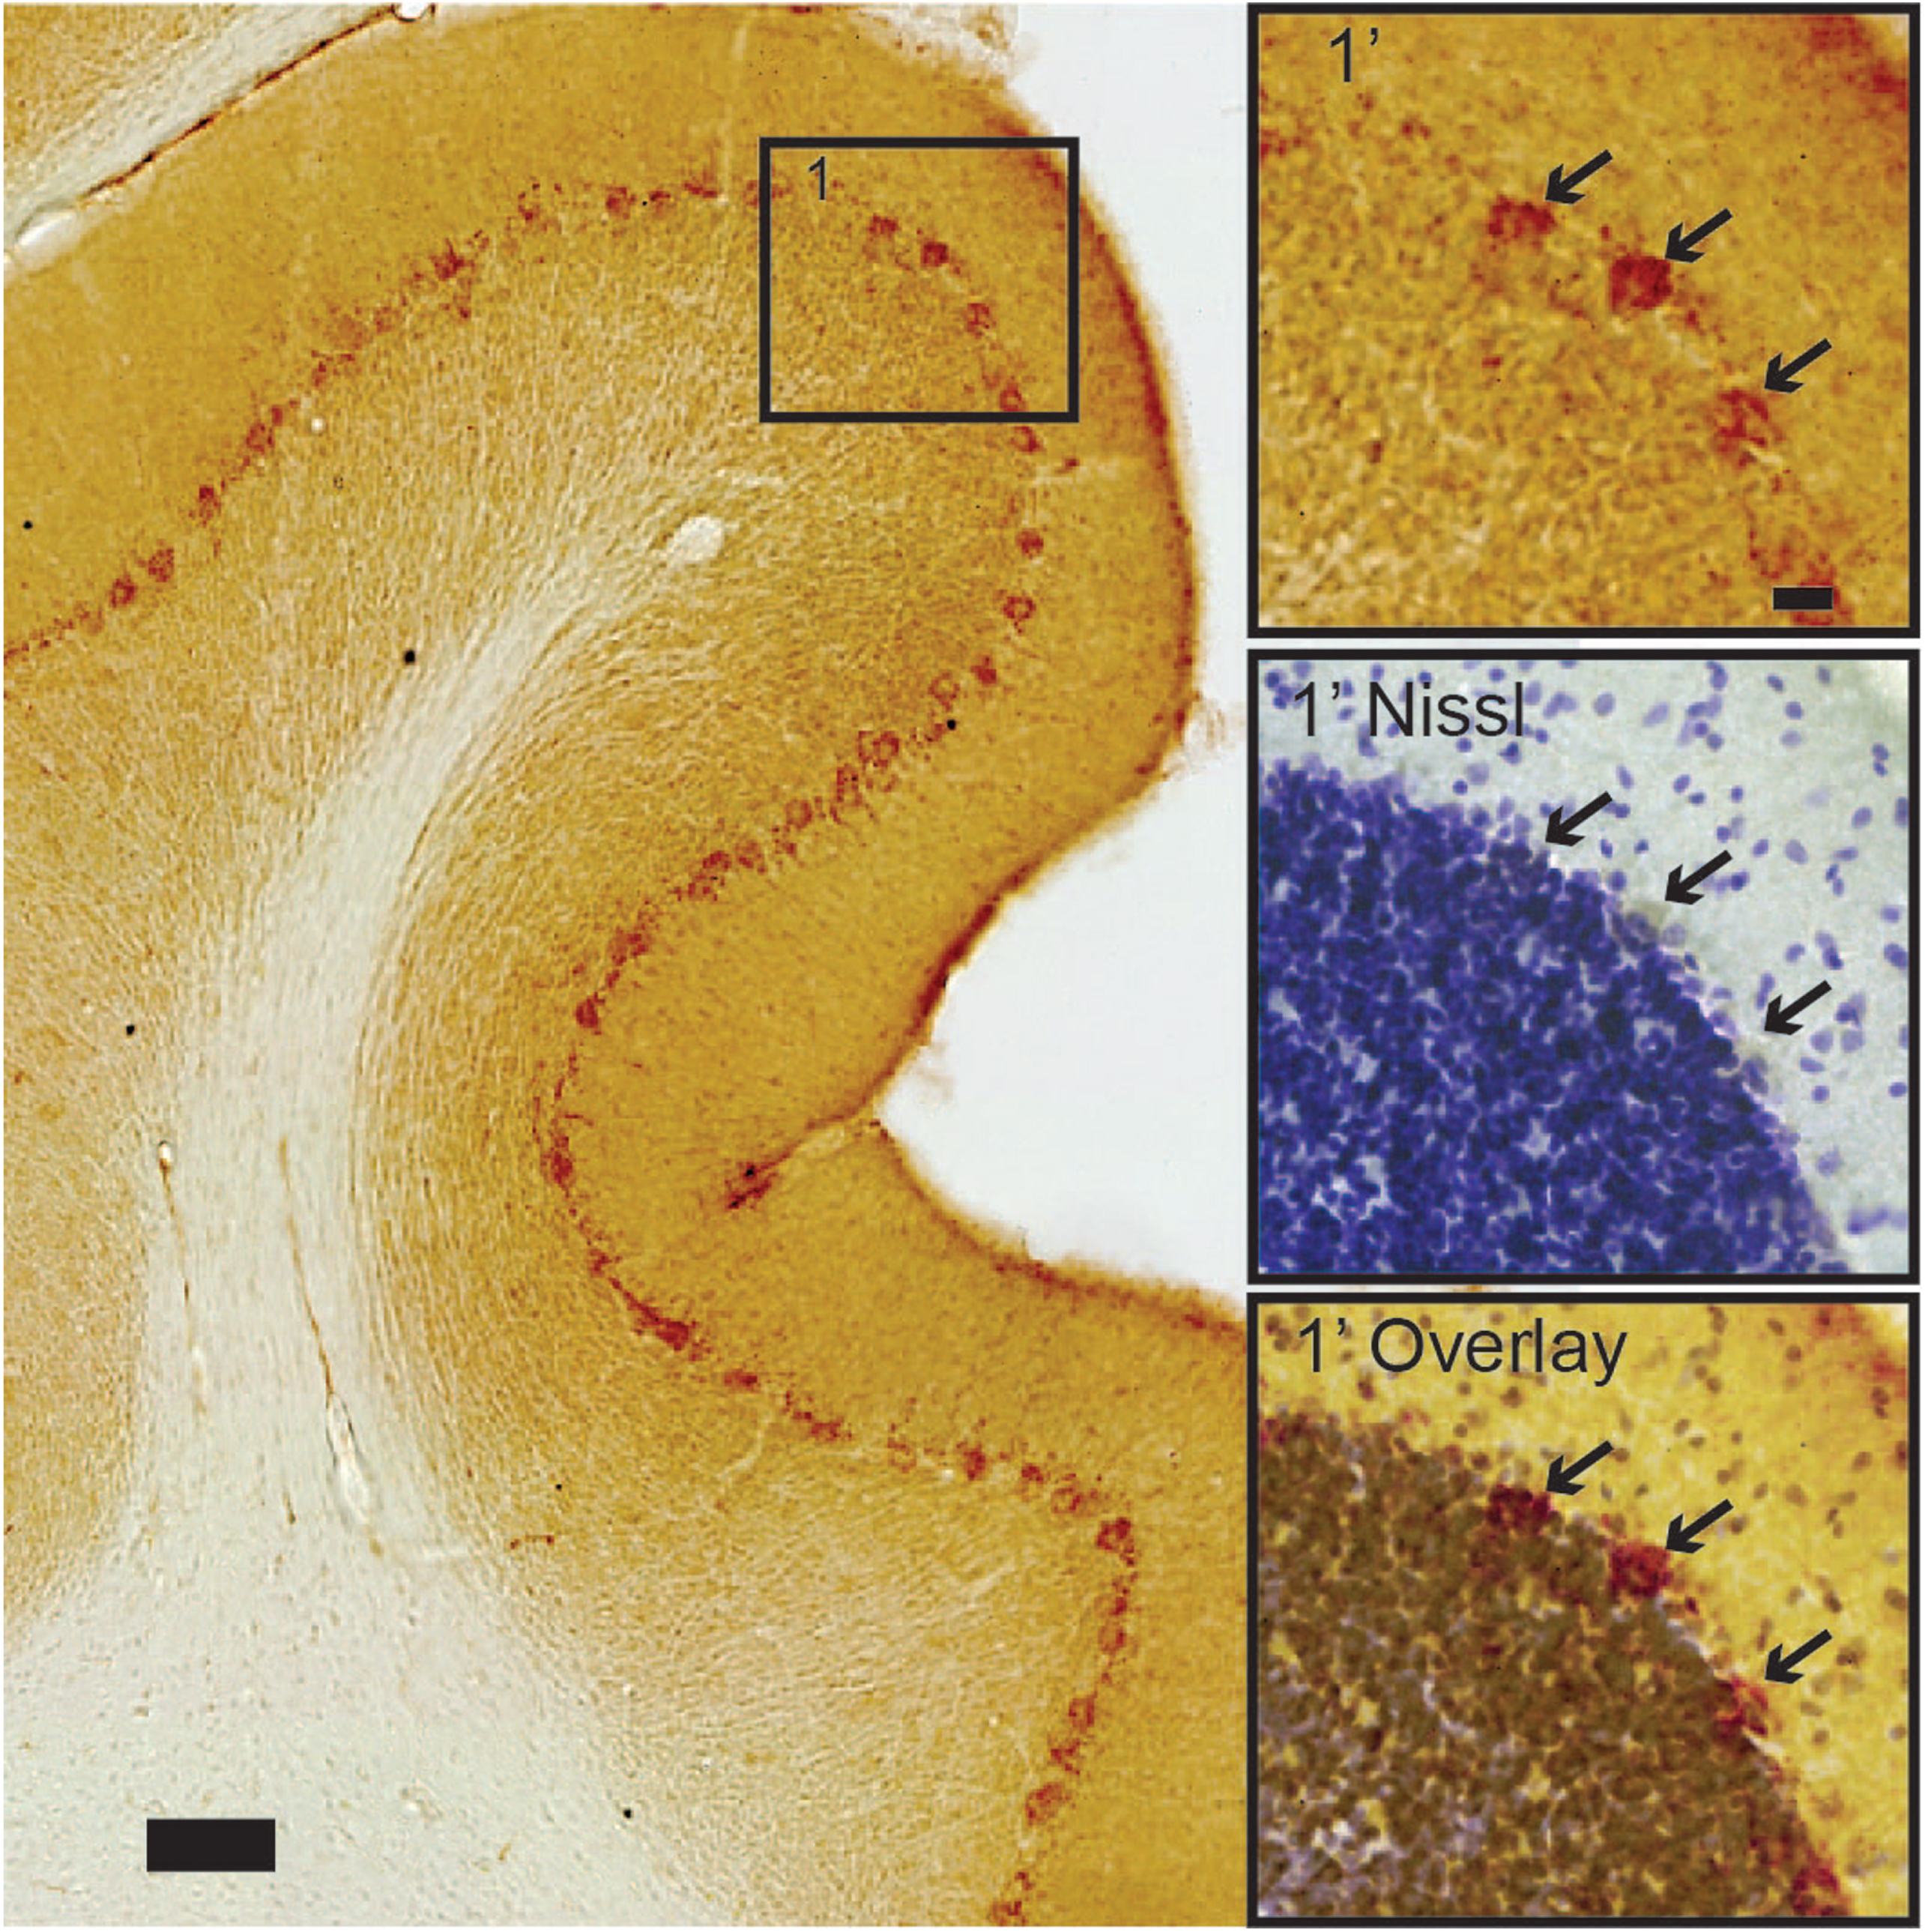 Cerebellar Purkinje neurons contain high levels of iAβ42, in stark contrast to surrounding neurons. Insets show arrows pointing to (top) iAβ42-positive Purkinje neurons, followed by (middle) the position of these neurons after Nissl counterstain on the same section, and (bottom) a contrast enhanced overlay of the top and middle insets. Scale bars: 100μm (large image) and insets 20μm.